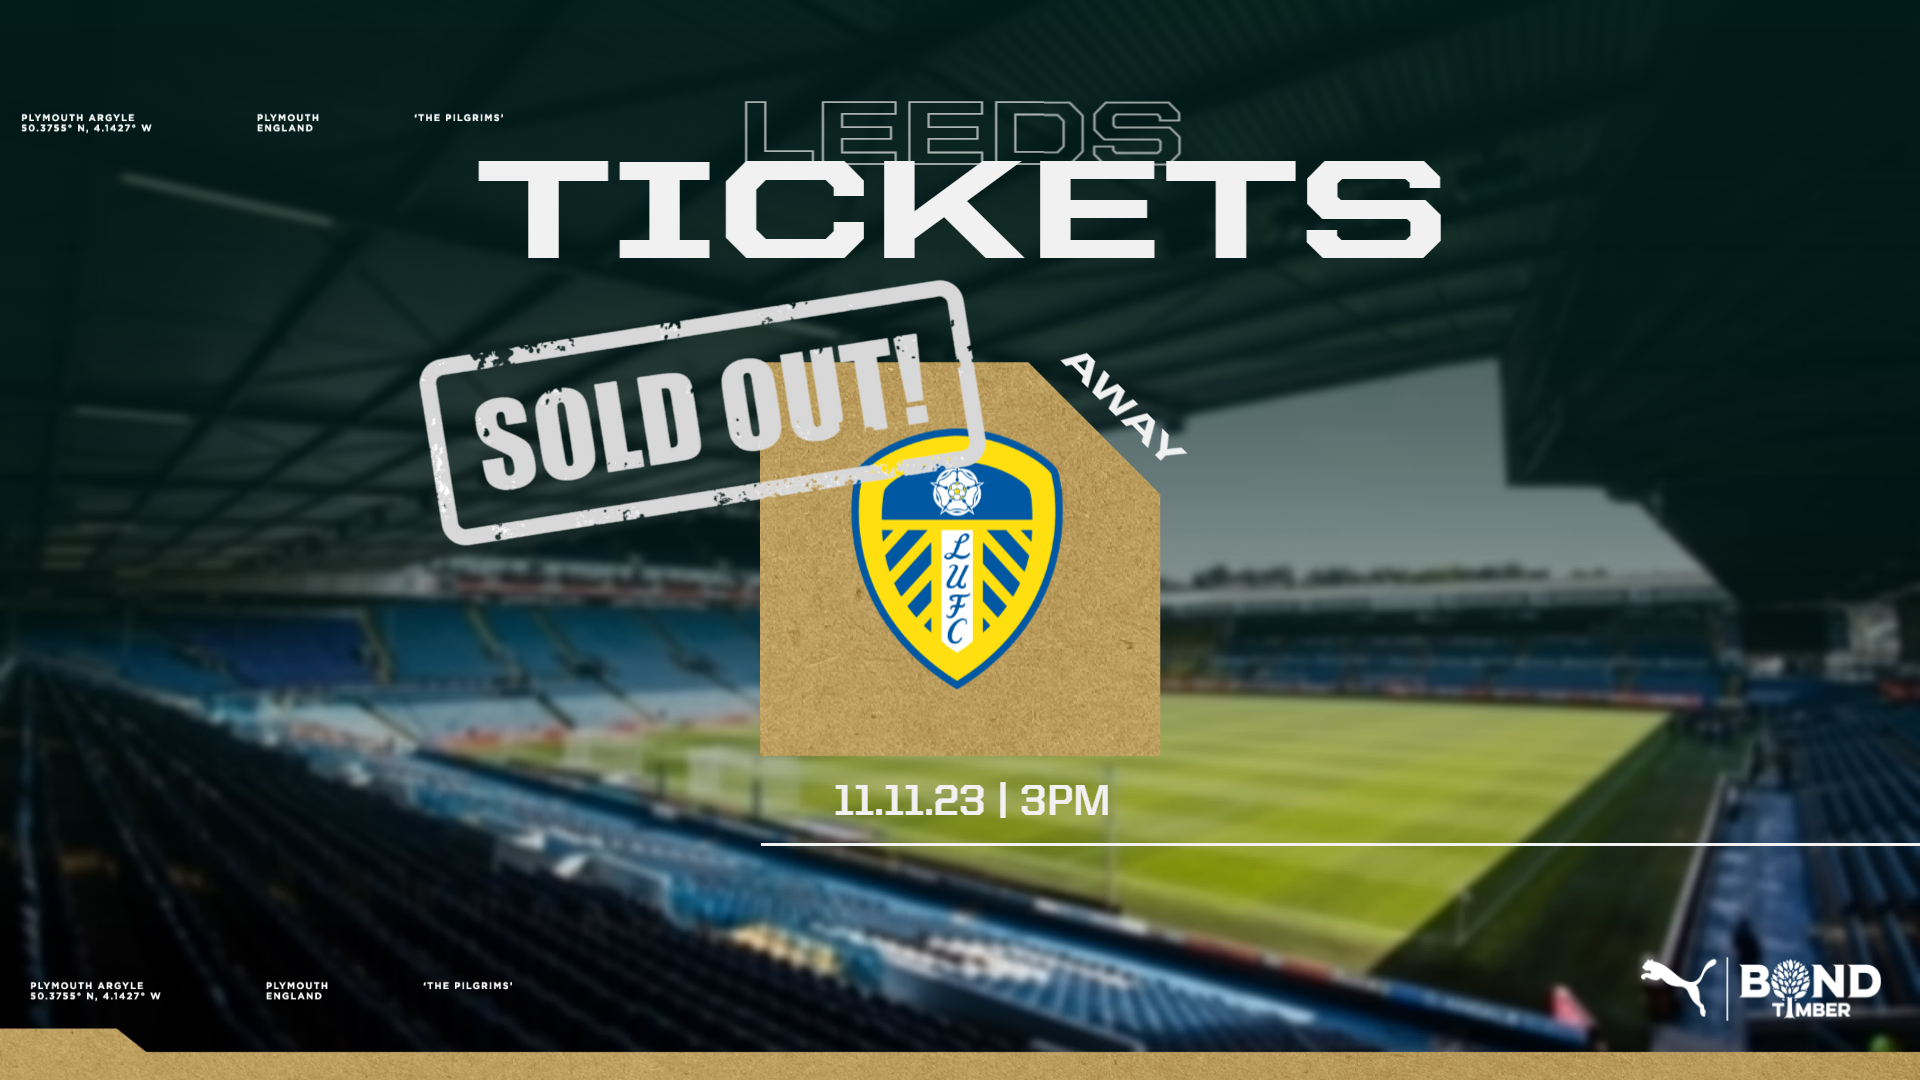 Leeds tickets sold out